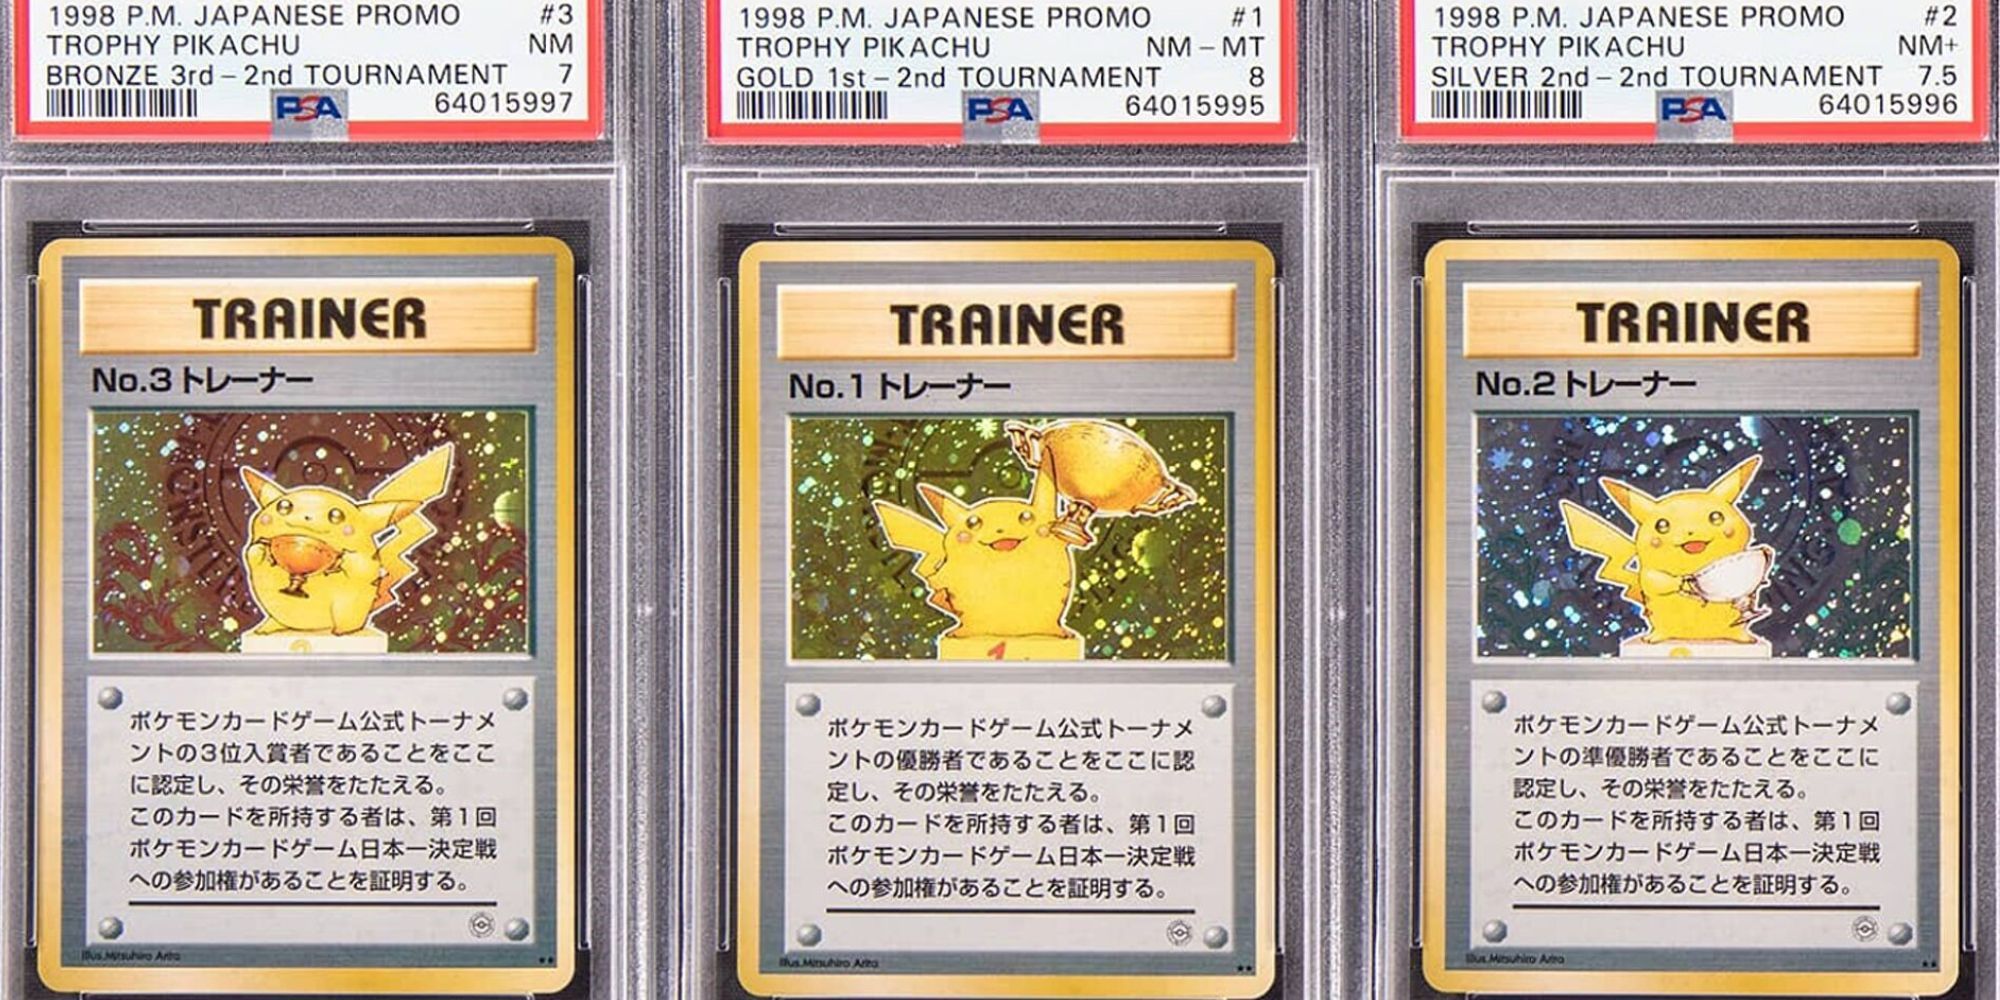 Super rare Pikachu card sold for more than 7 billion, only four versions worldwide - Photo 2.